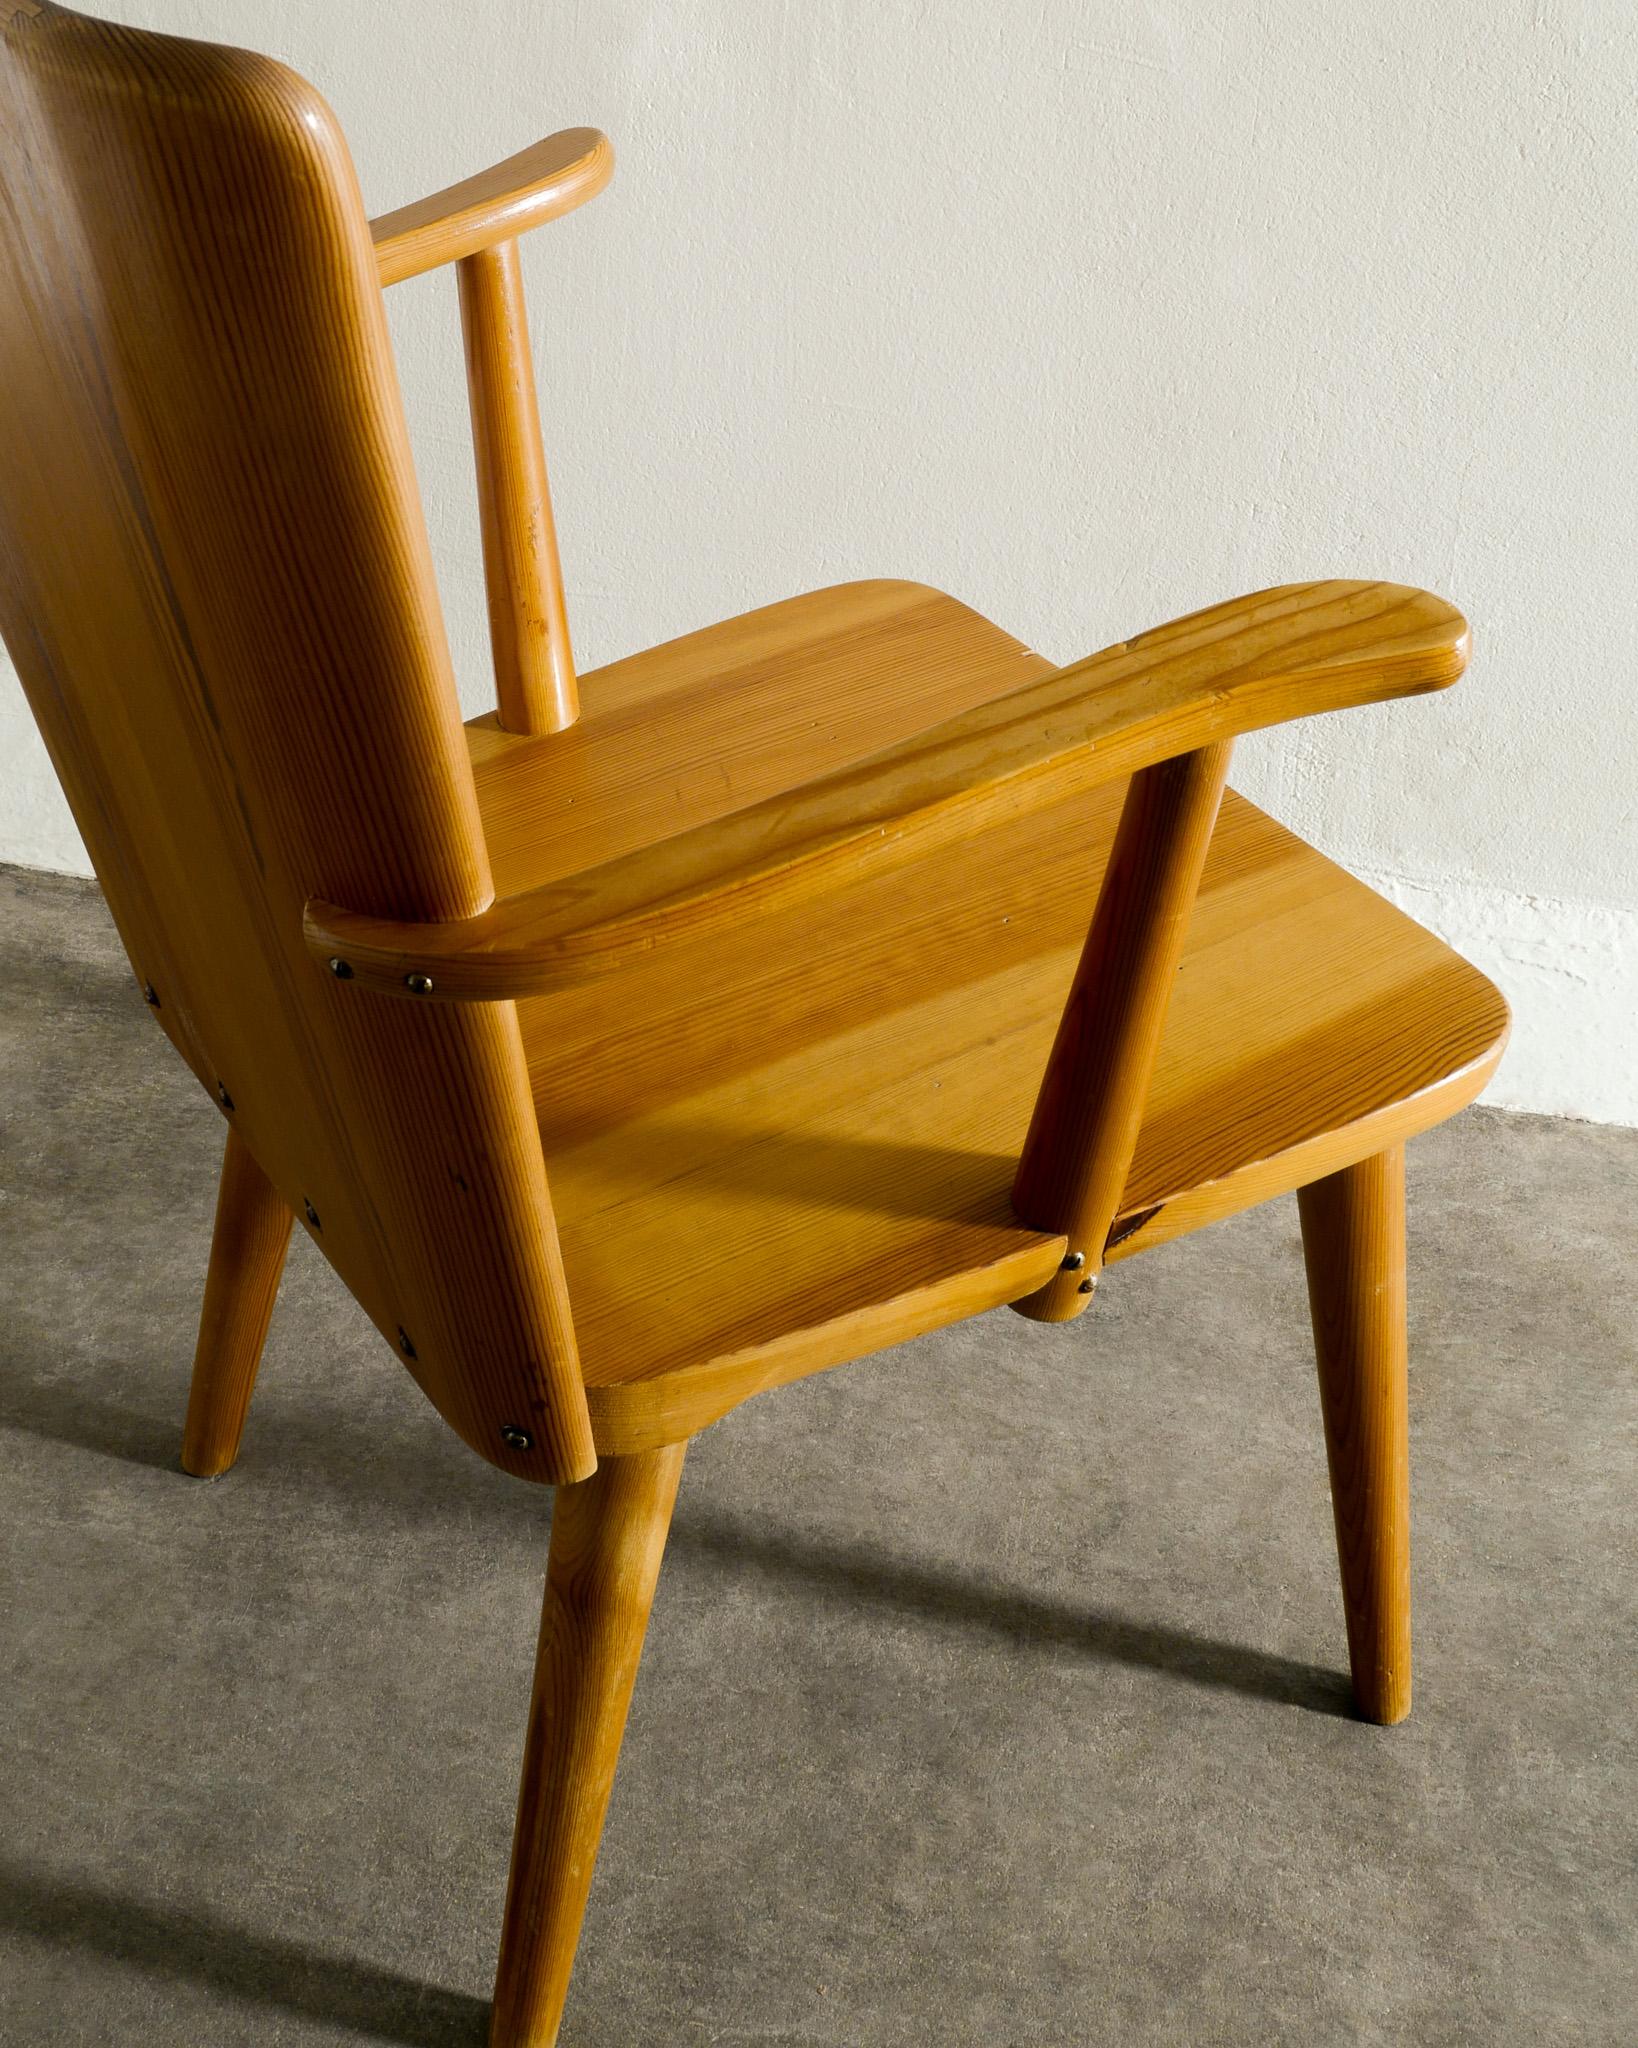 Swedish Mid Century Arm Chair in Pine by Göran Malmvall Produced by Svensk Fur, 1940s For Sale